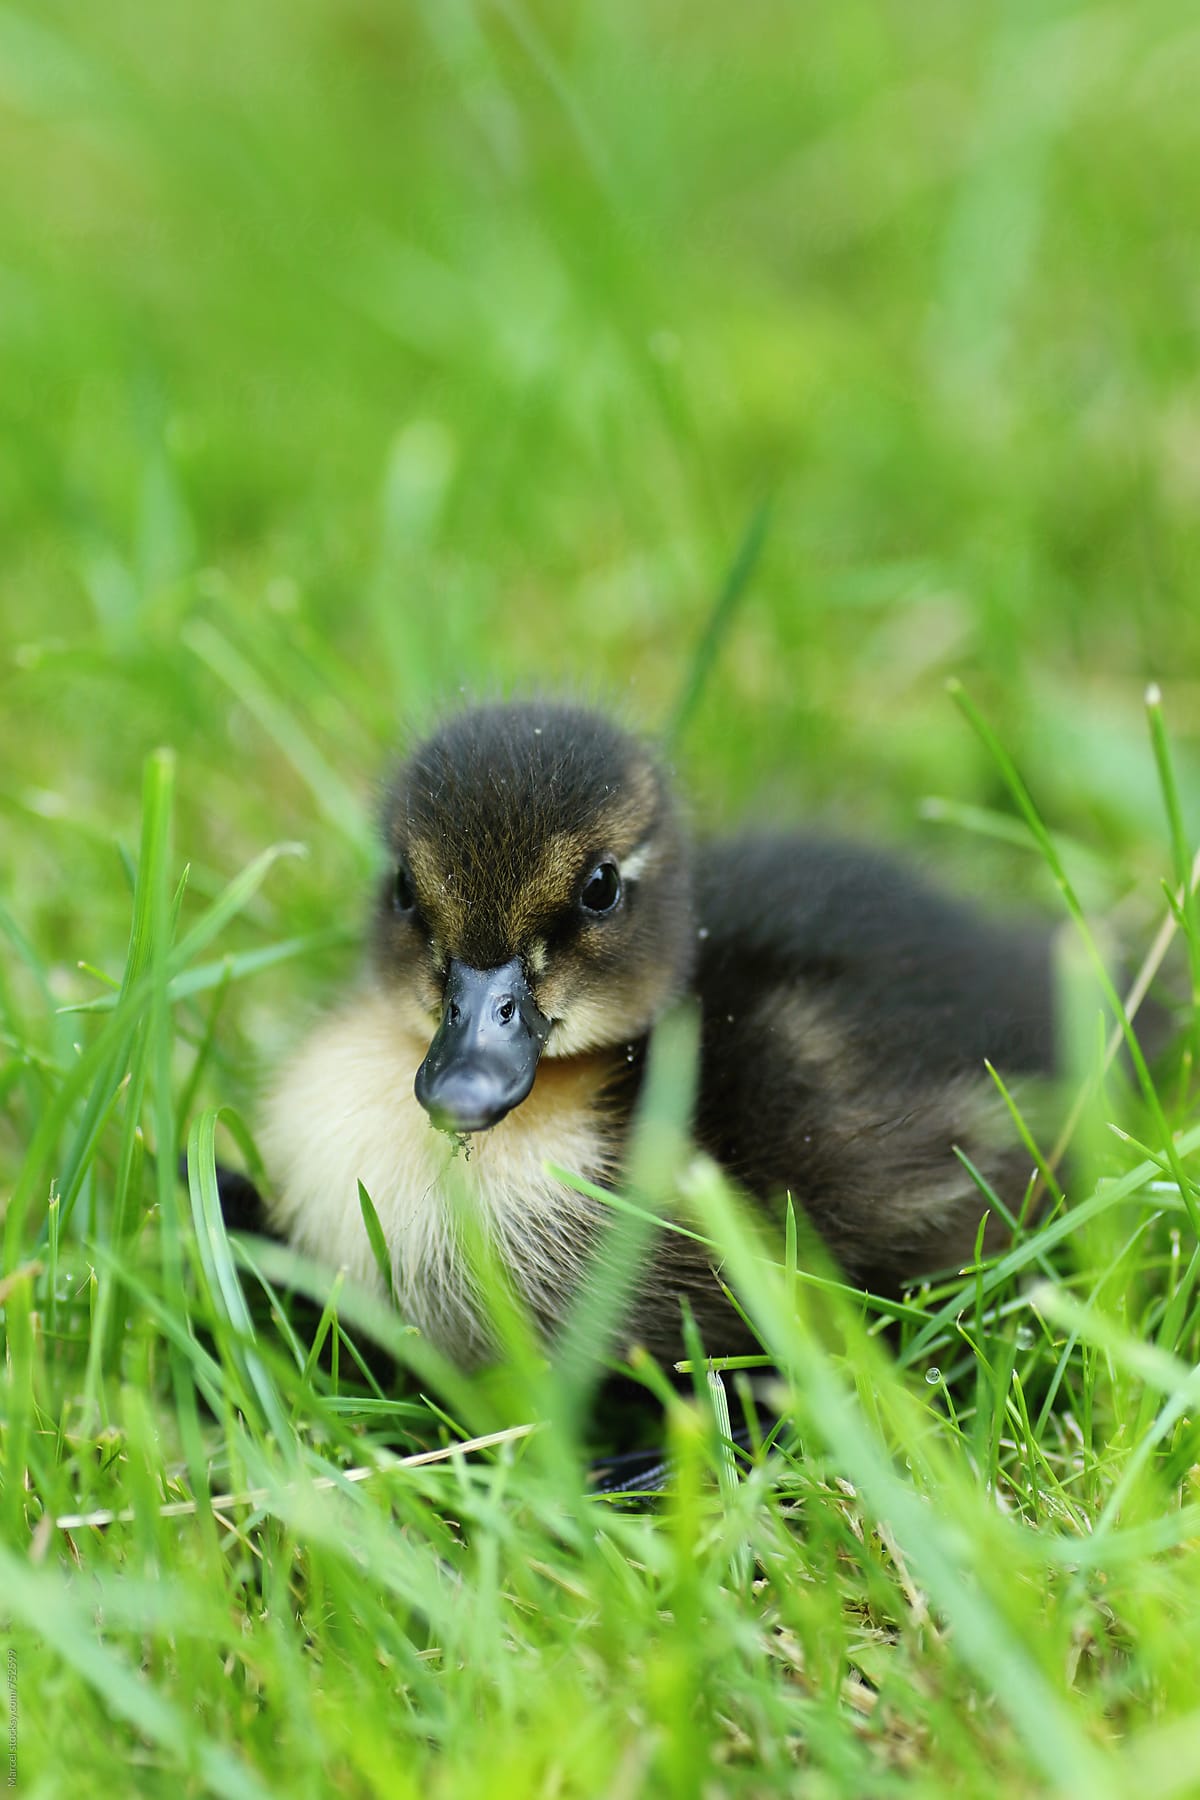 Extremely cute newborn duckling in the grass